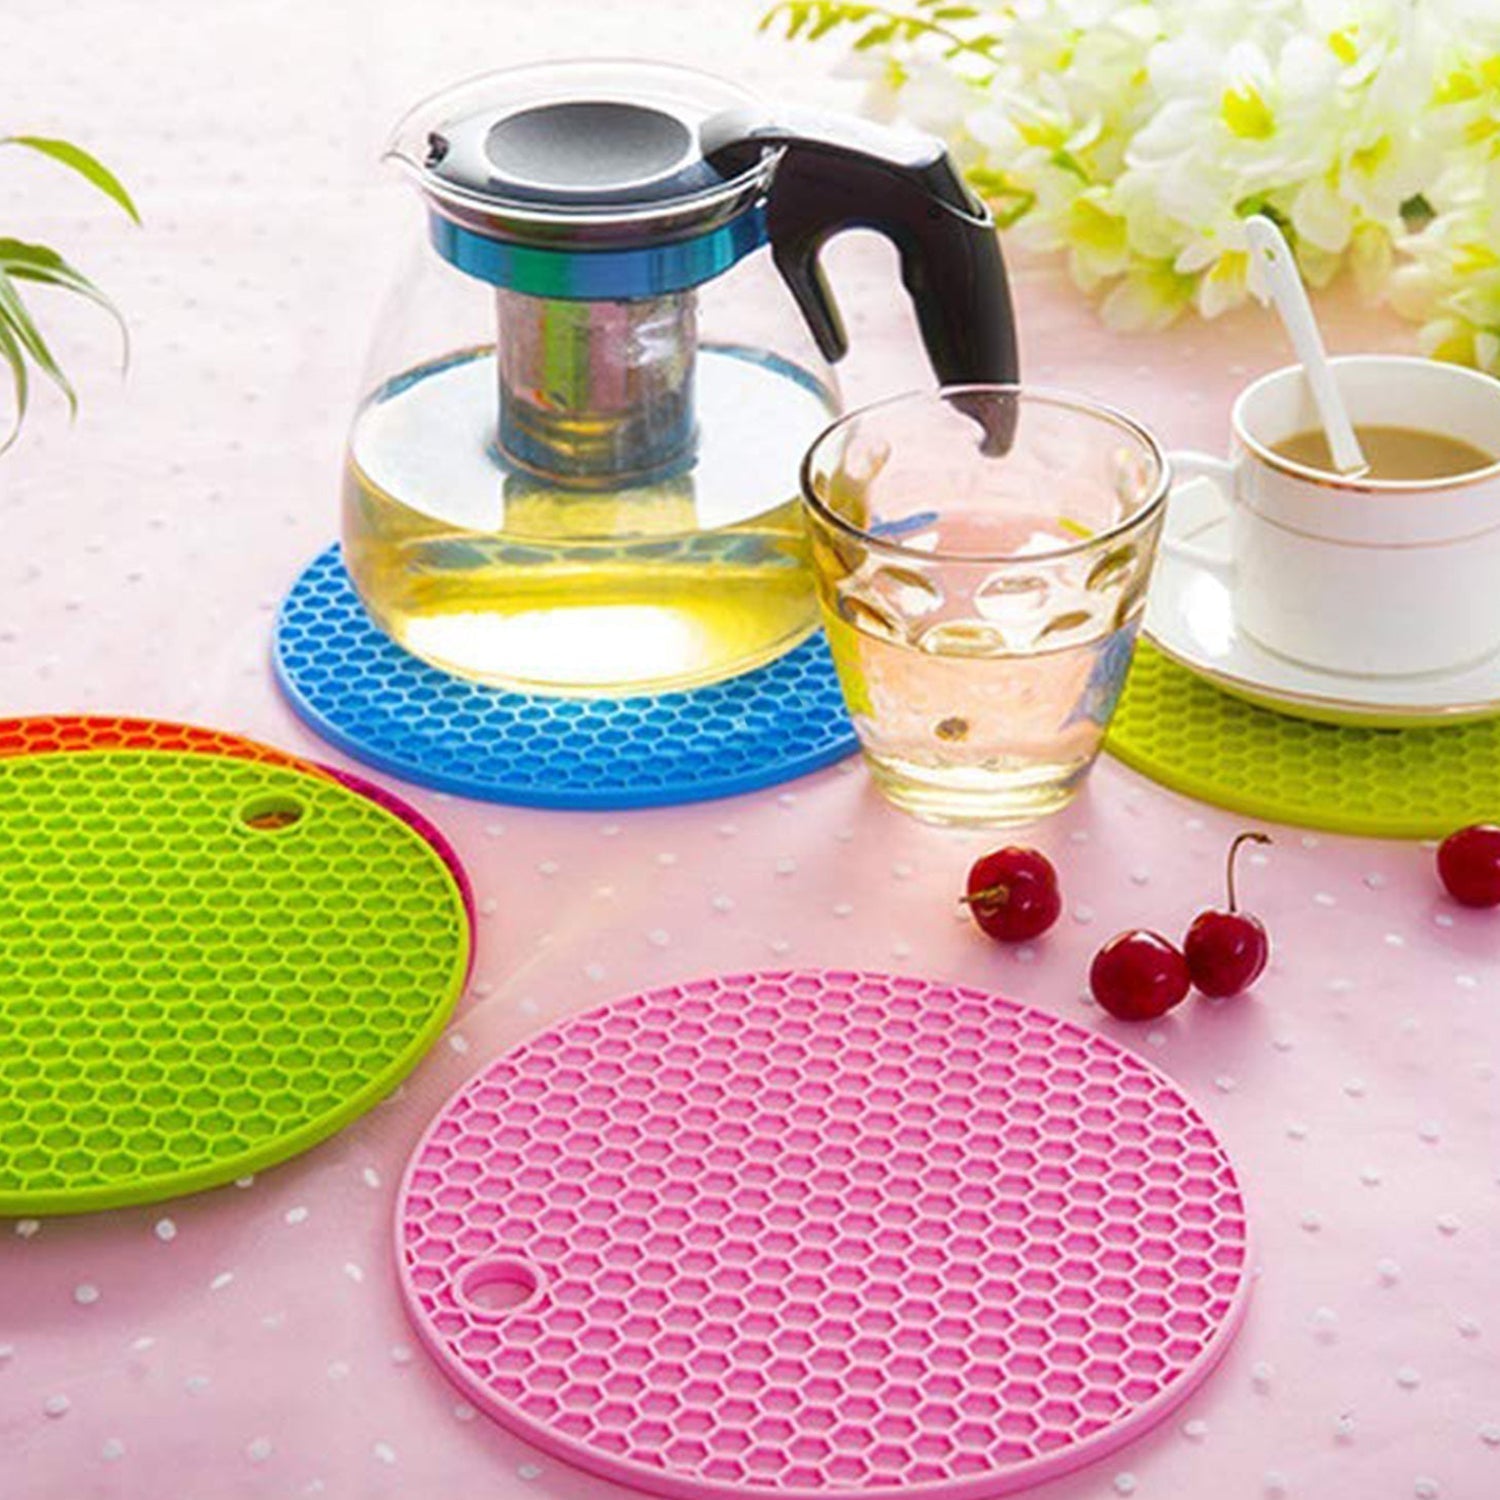 4846 4 Pc Silicon Hot Mat For Placing Hot Vessels And Utensils Over It Easily Without Having Any Visible Marks On Surfaces.